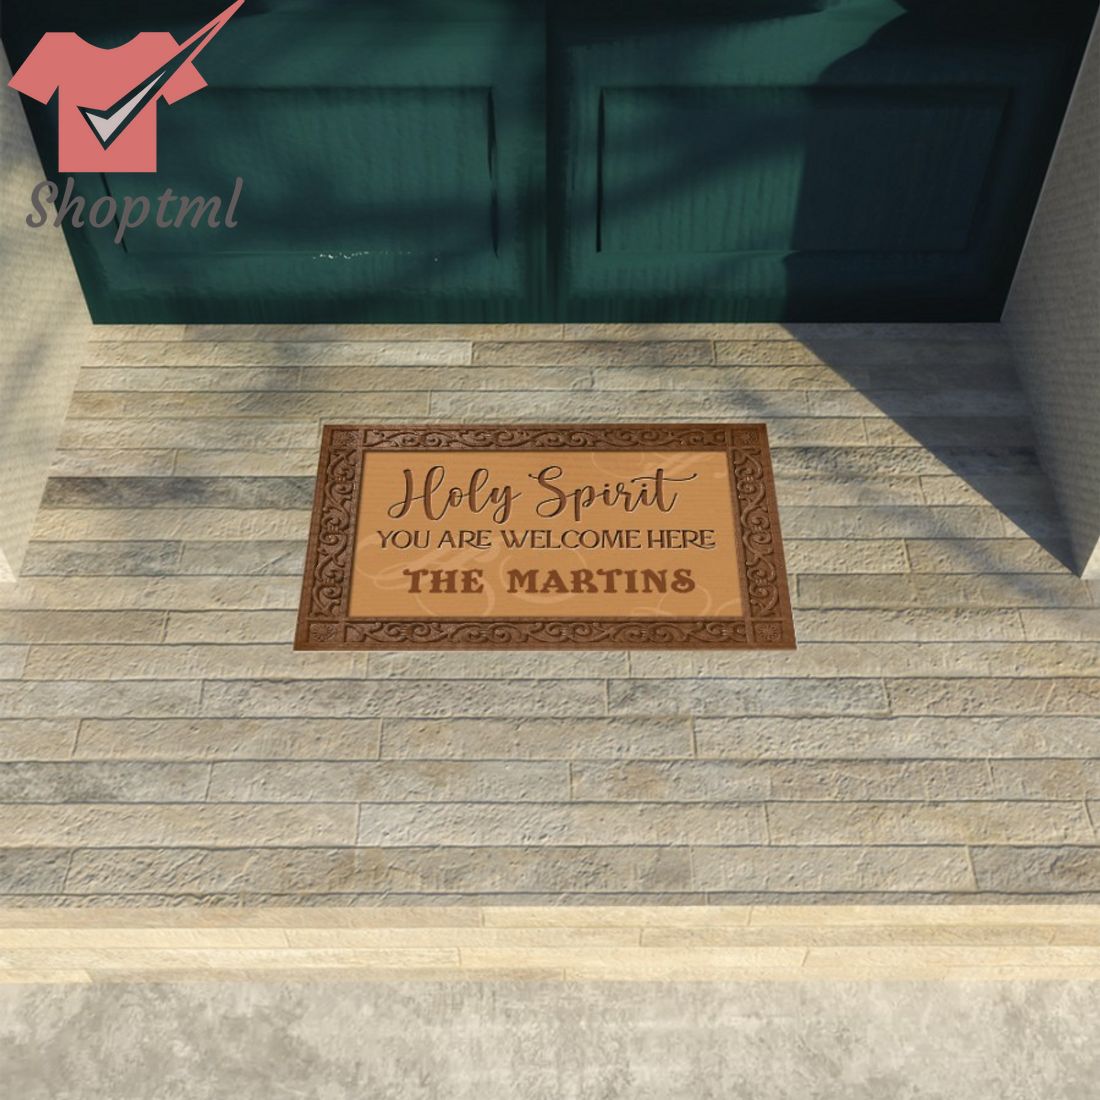 The Martins Holy Spirit You Are Welcome Here Wood Grain Doormat